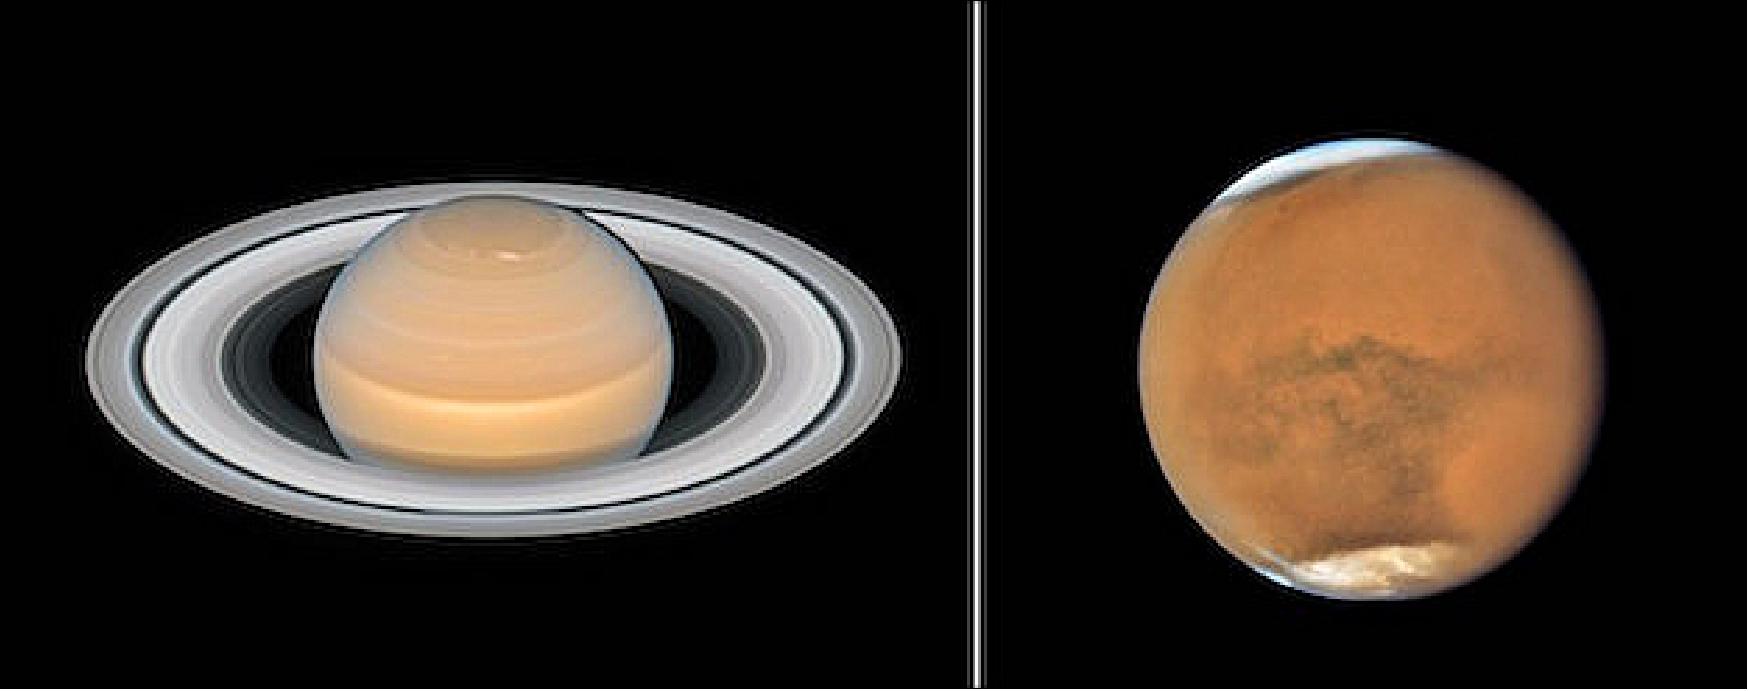 Figure 29: This image shows the recent observations of the planets Mars (right) and Saturn (left) made with the NASA/ESA Hubble Space Telescope. The observations of both objects were made in June and July 2018 and show the planets close to their opposition (image credit: Saturn: NASA, ESA, A. Simon (GSFC) and the OPAL Team, and J. DePasquale (STScI); Mars: NASA, ESA, and STScI)